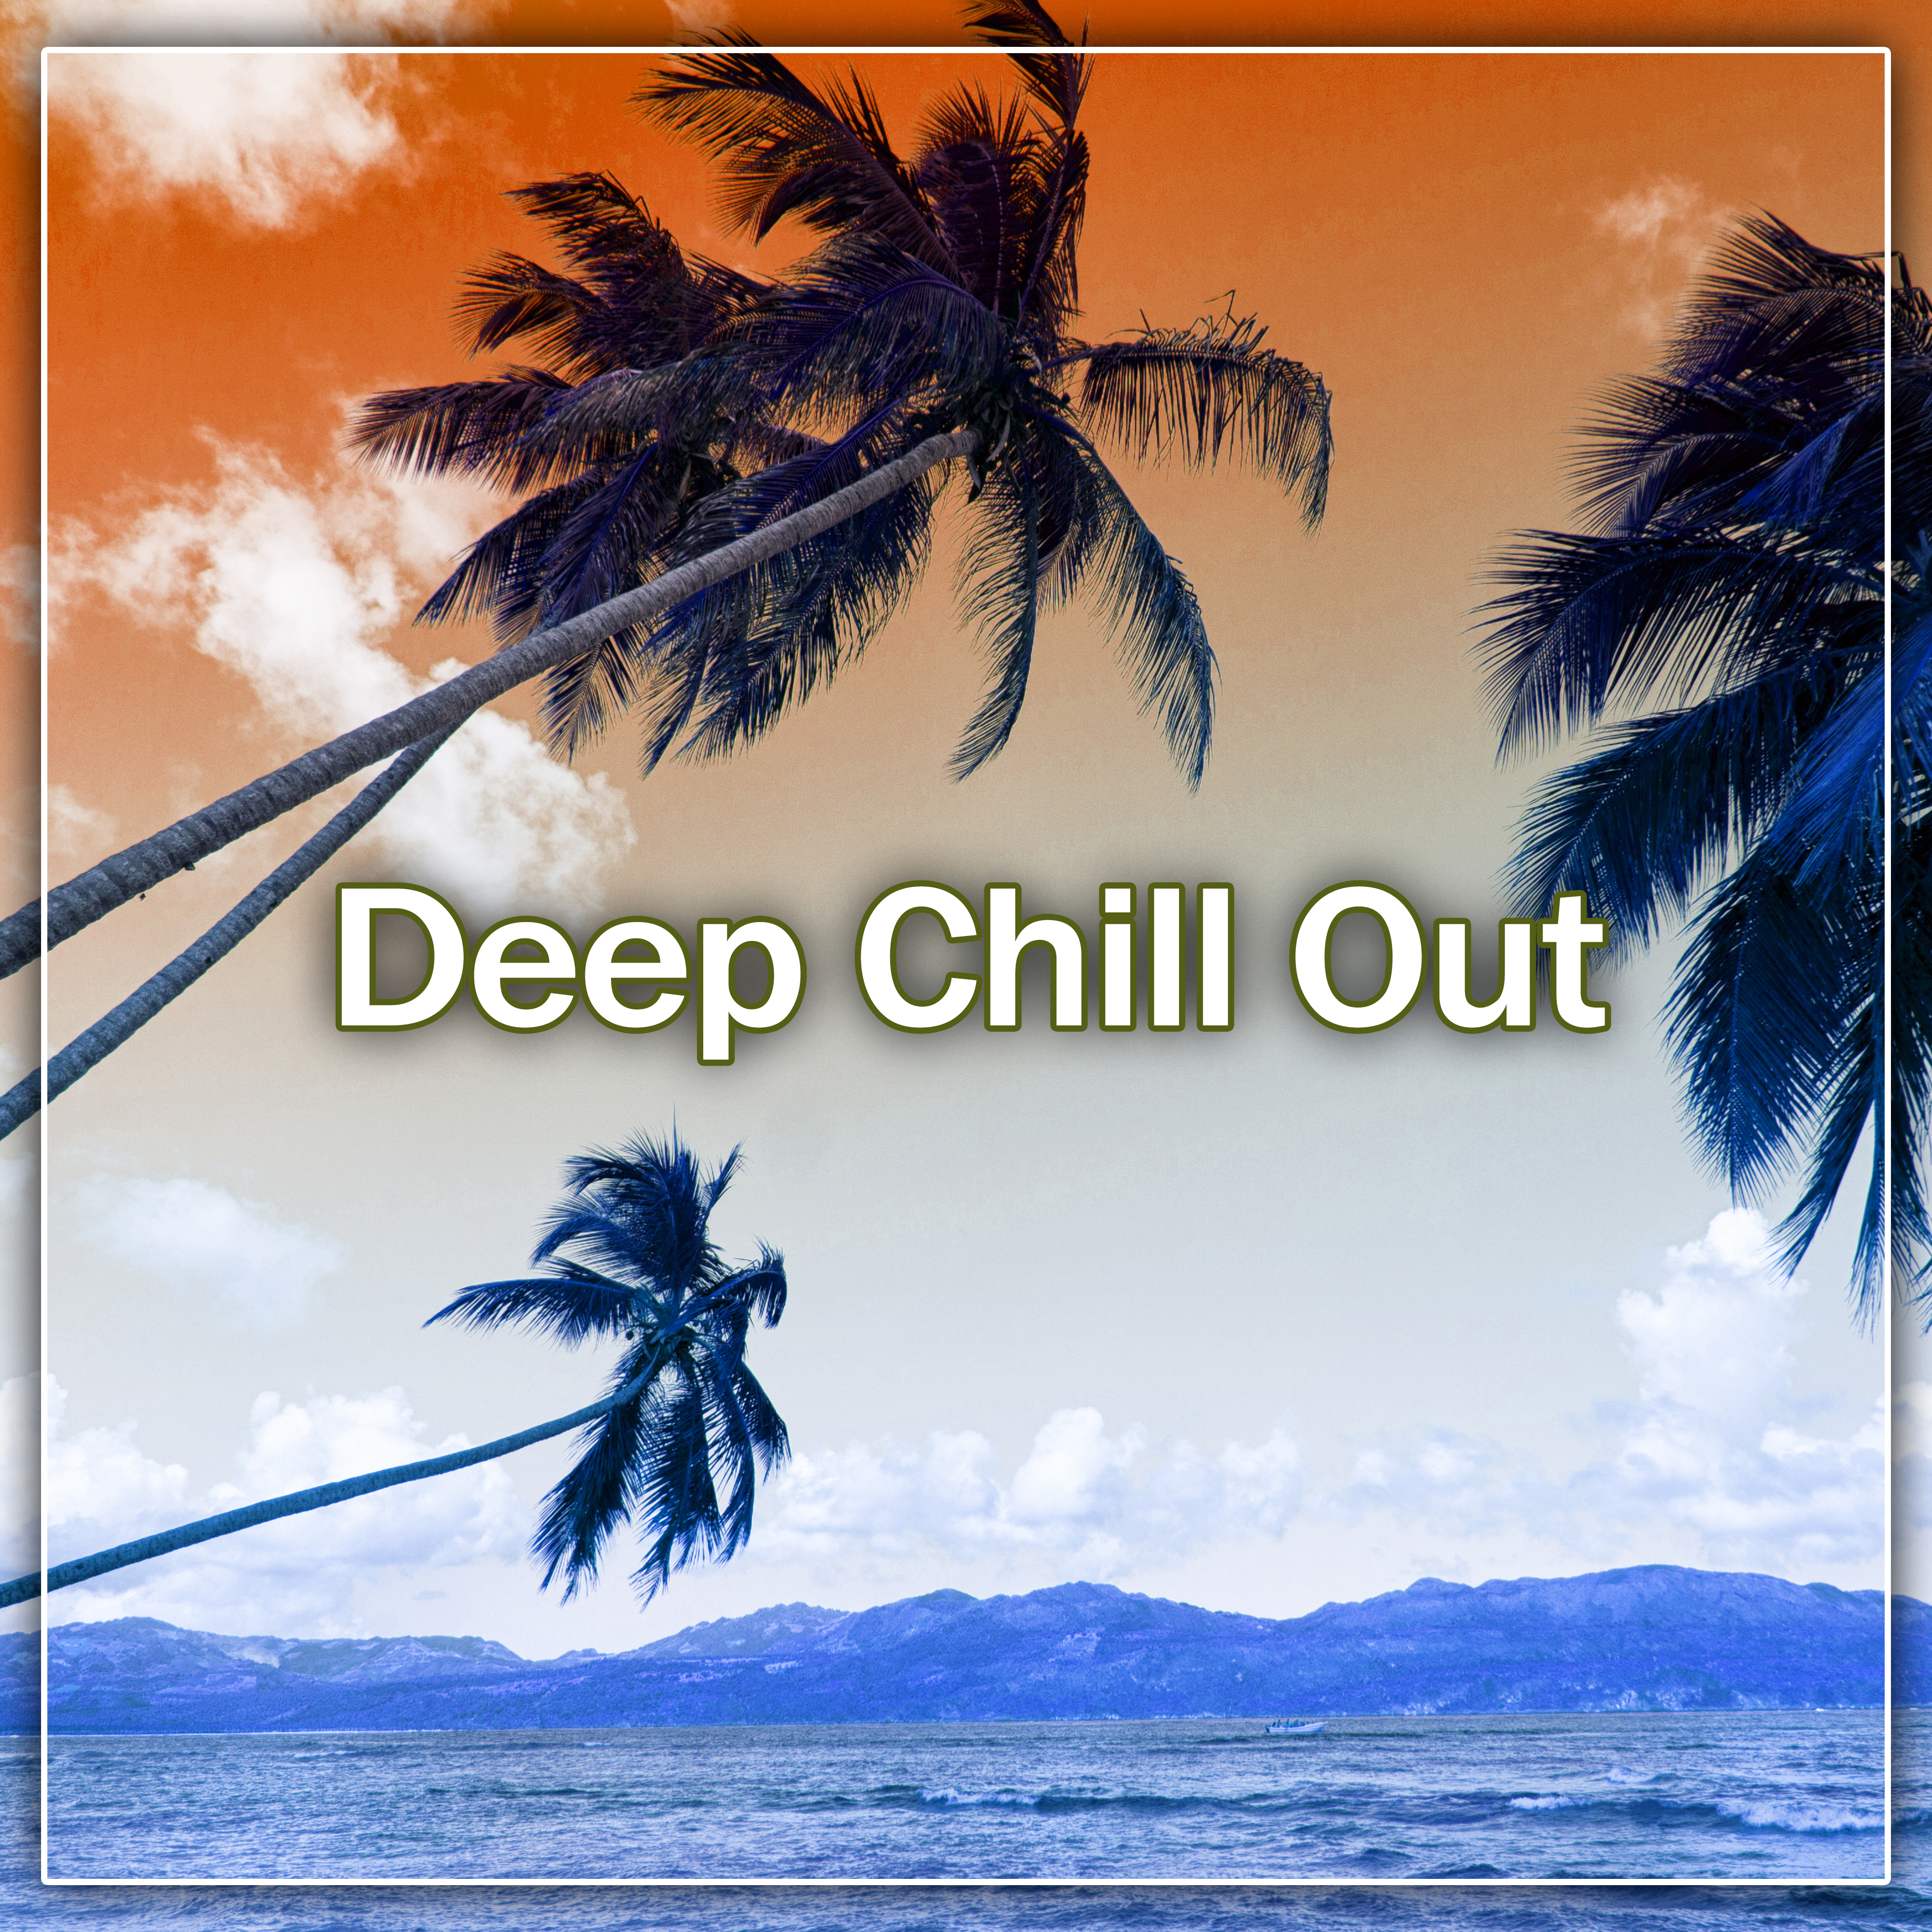 Deep Chill Out  Best Chill Out Hits, Party on Ibiza, Beach Cocktails, Long Night, Music to Have Fun